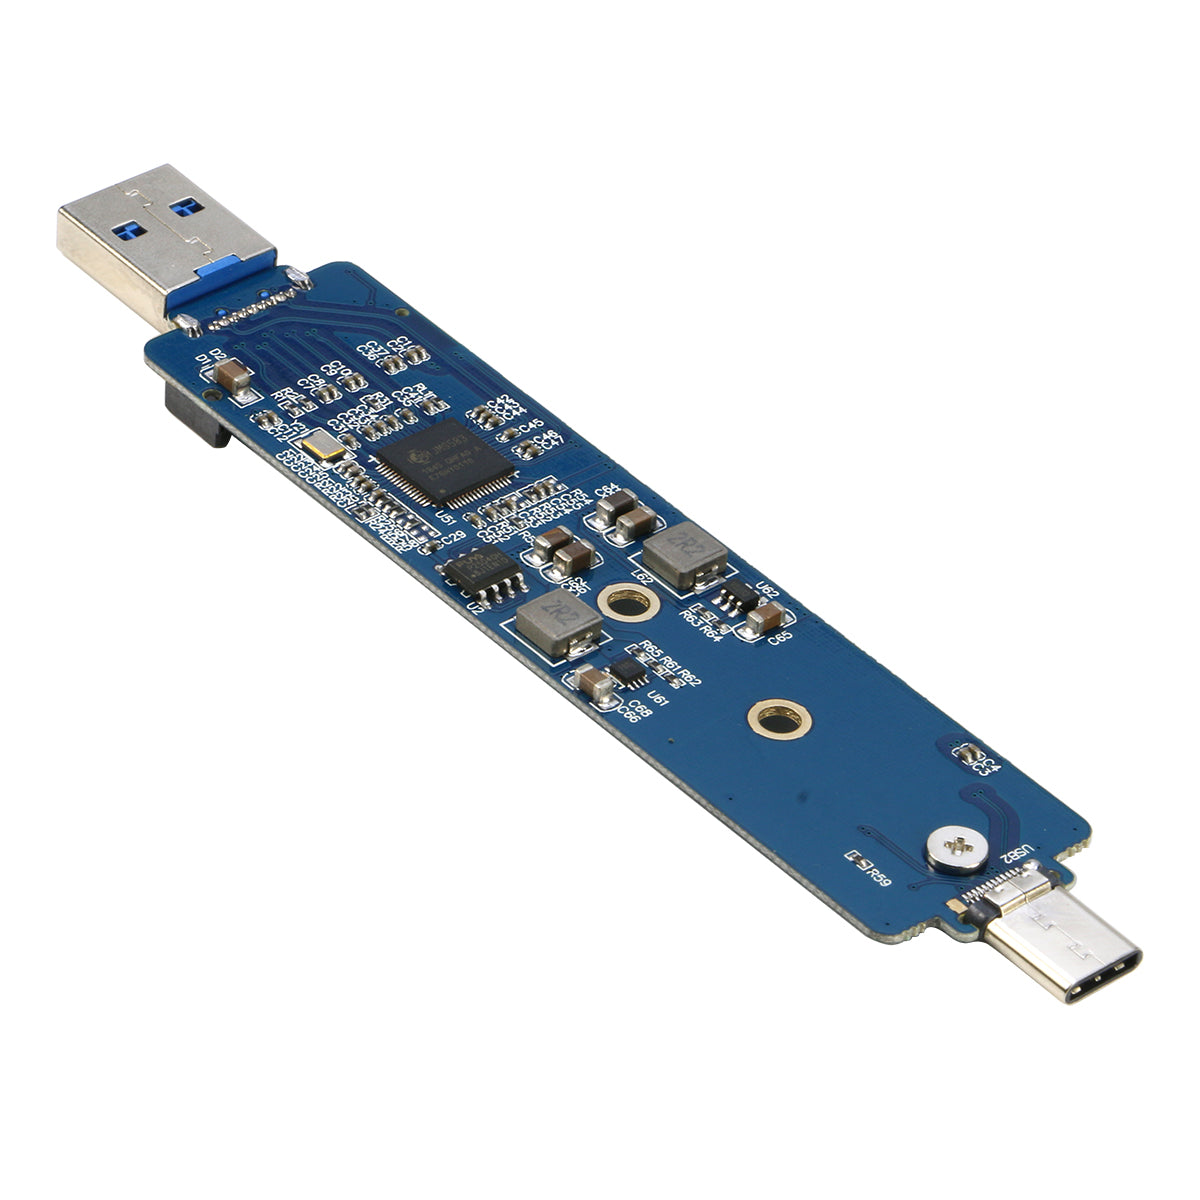 NVMe to USB Adapter, M.2 SSD to USB 3.1 Type A Card, Based Key M.2